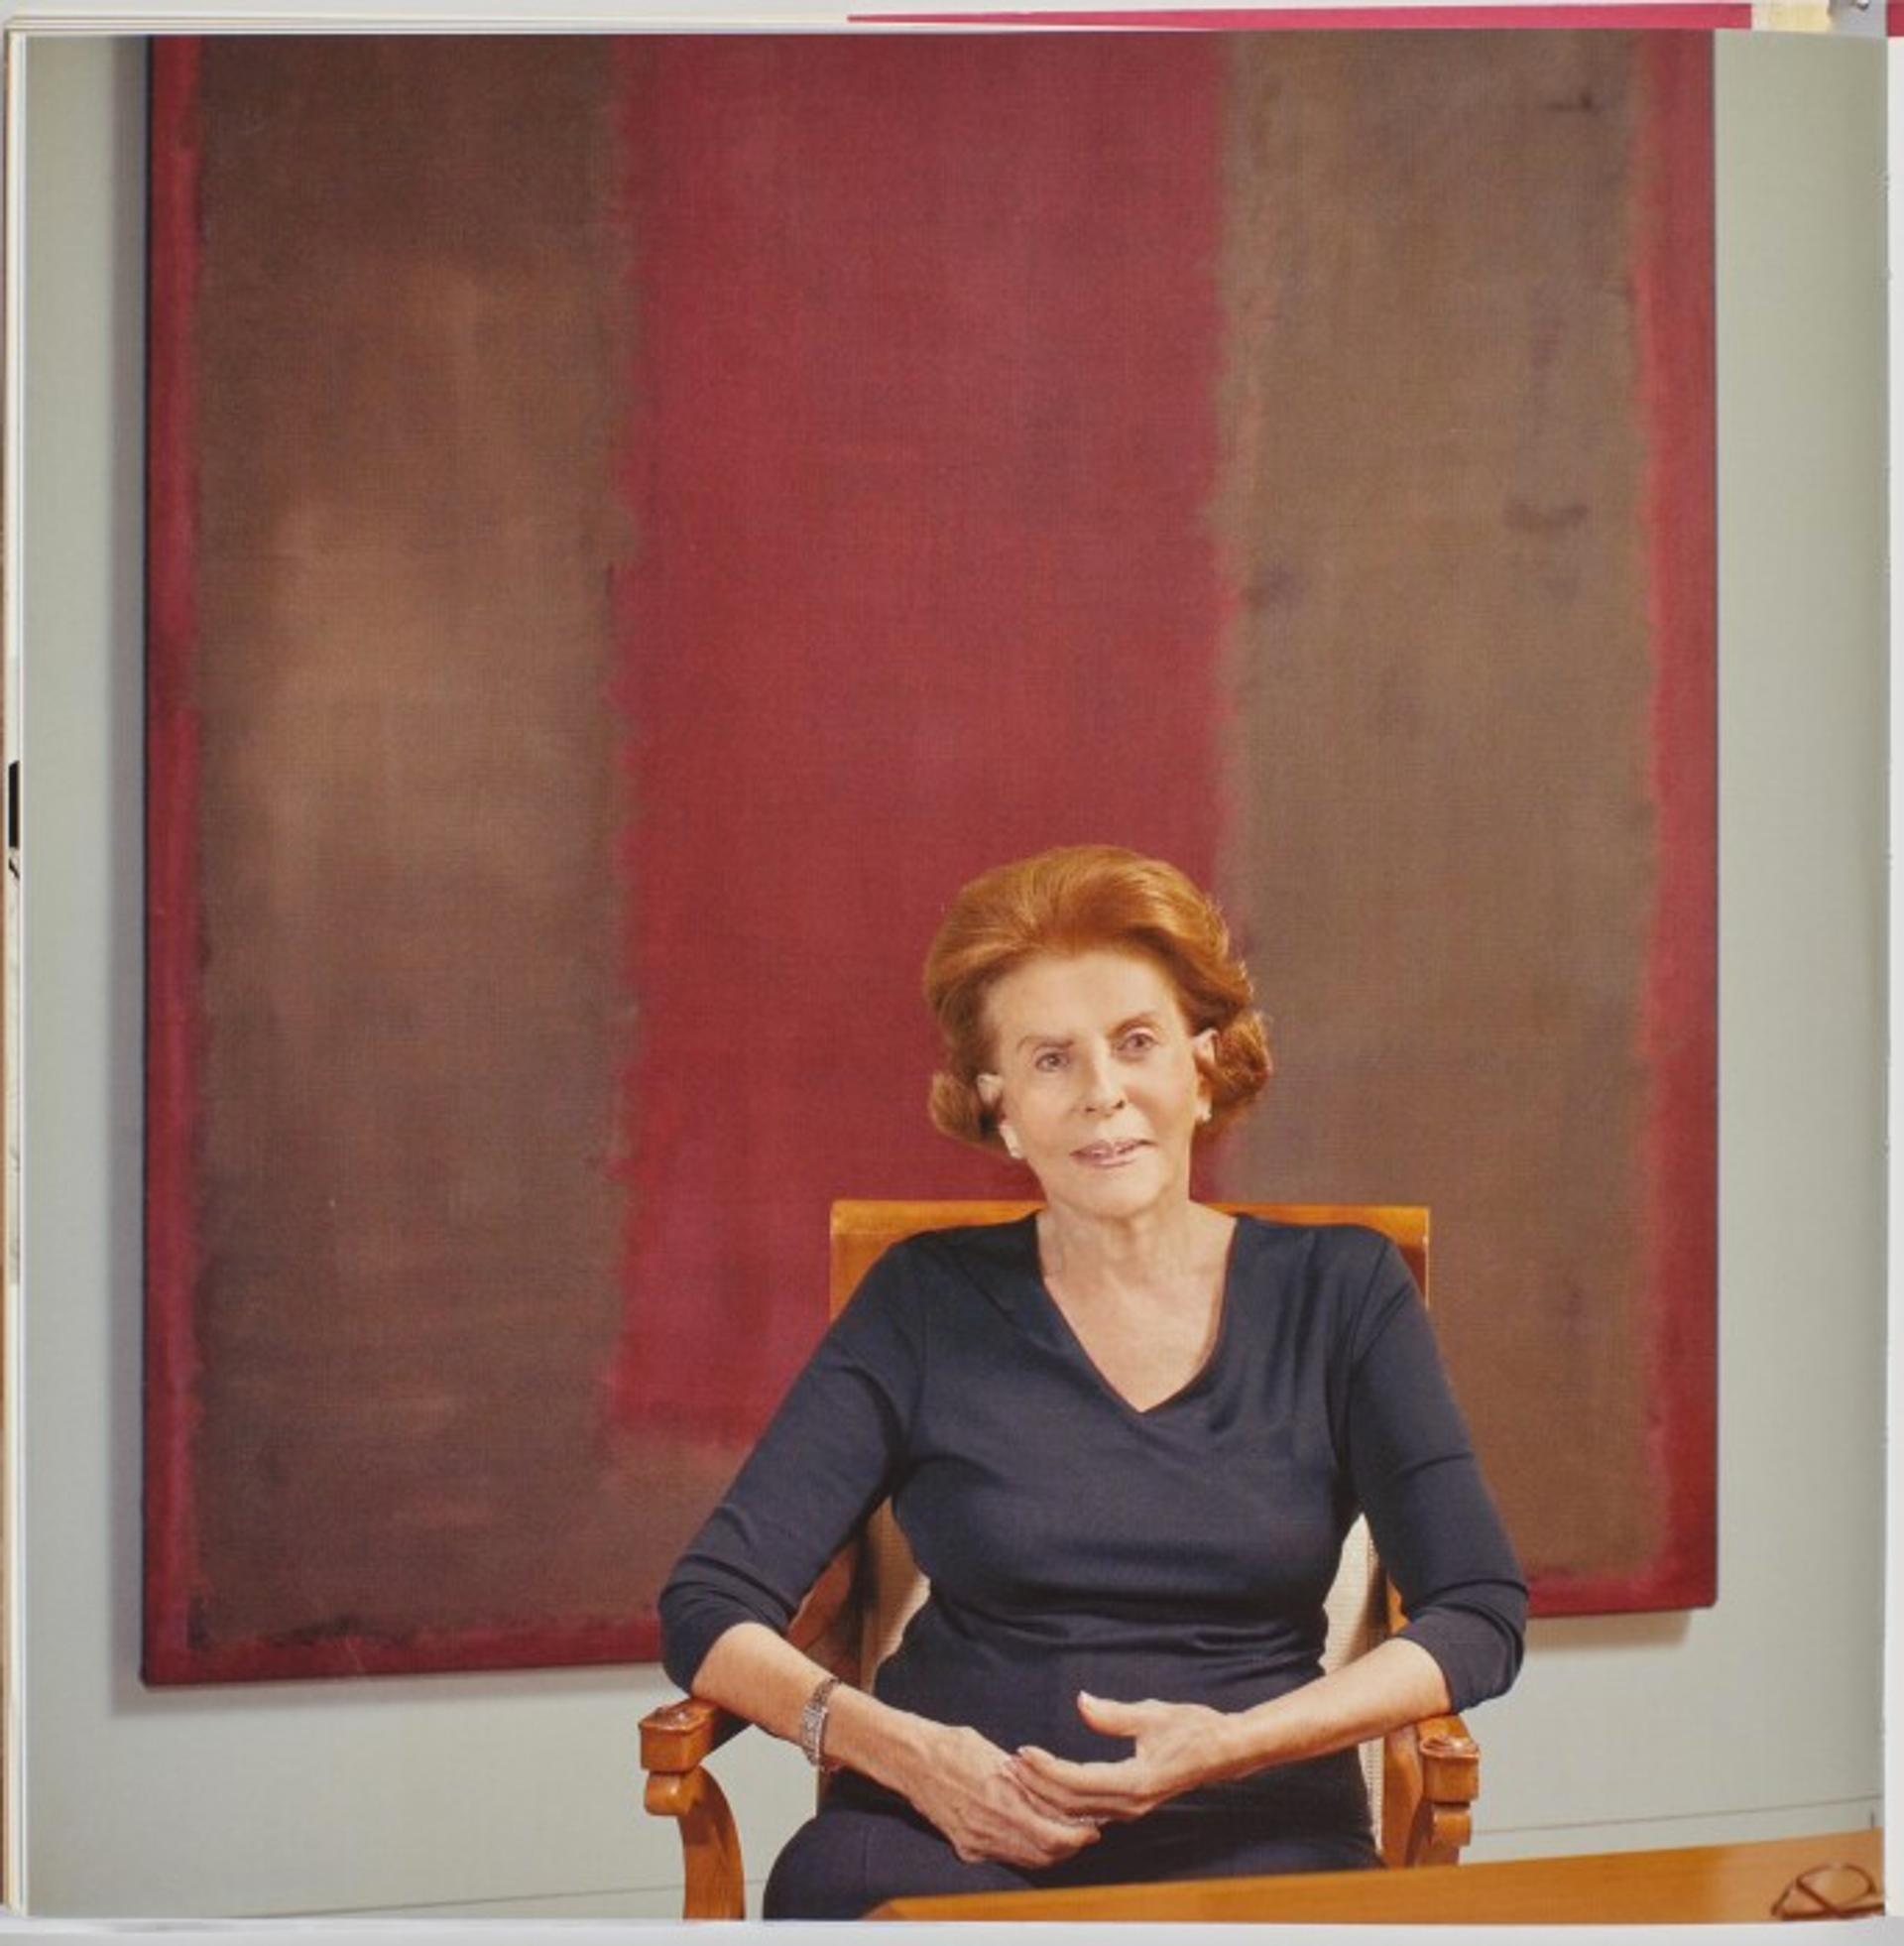 A photograph of Emily Fisher Landau posing in front of a 1958 Untitled work by Mark Rothko. She is shown wearing a navy blue dress.